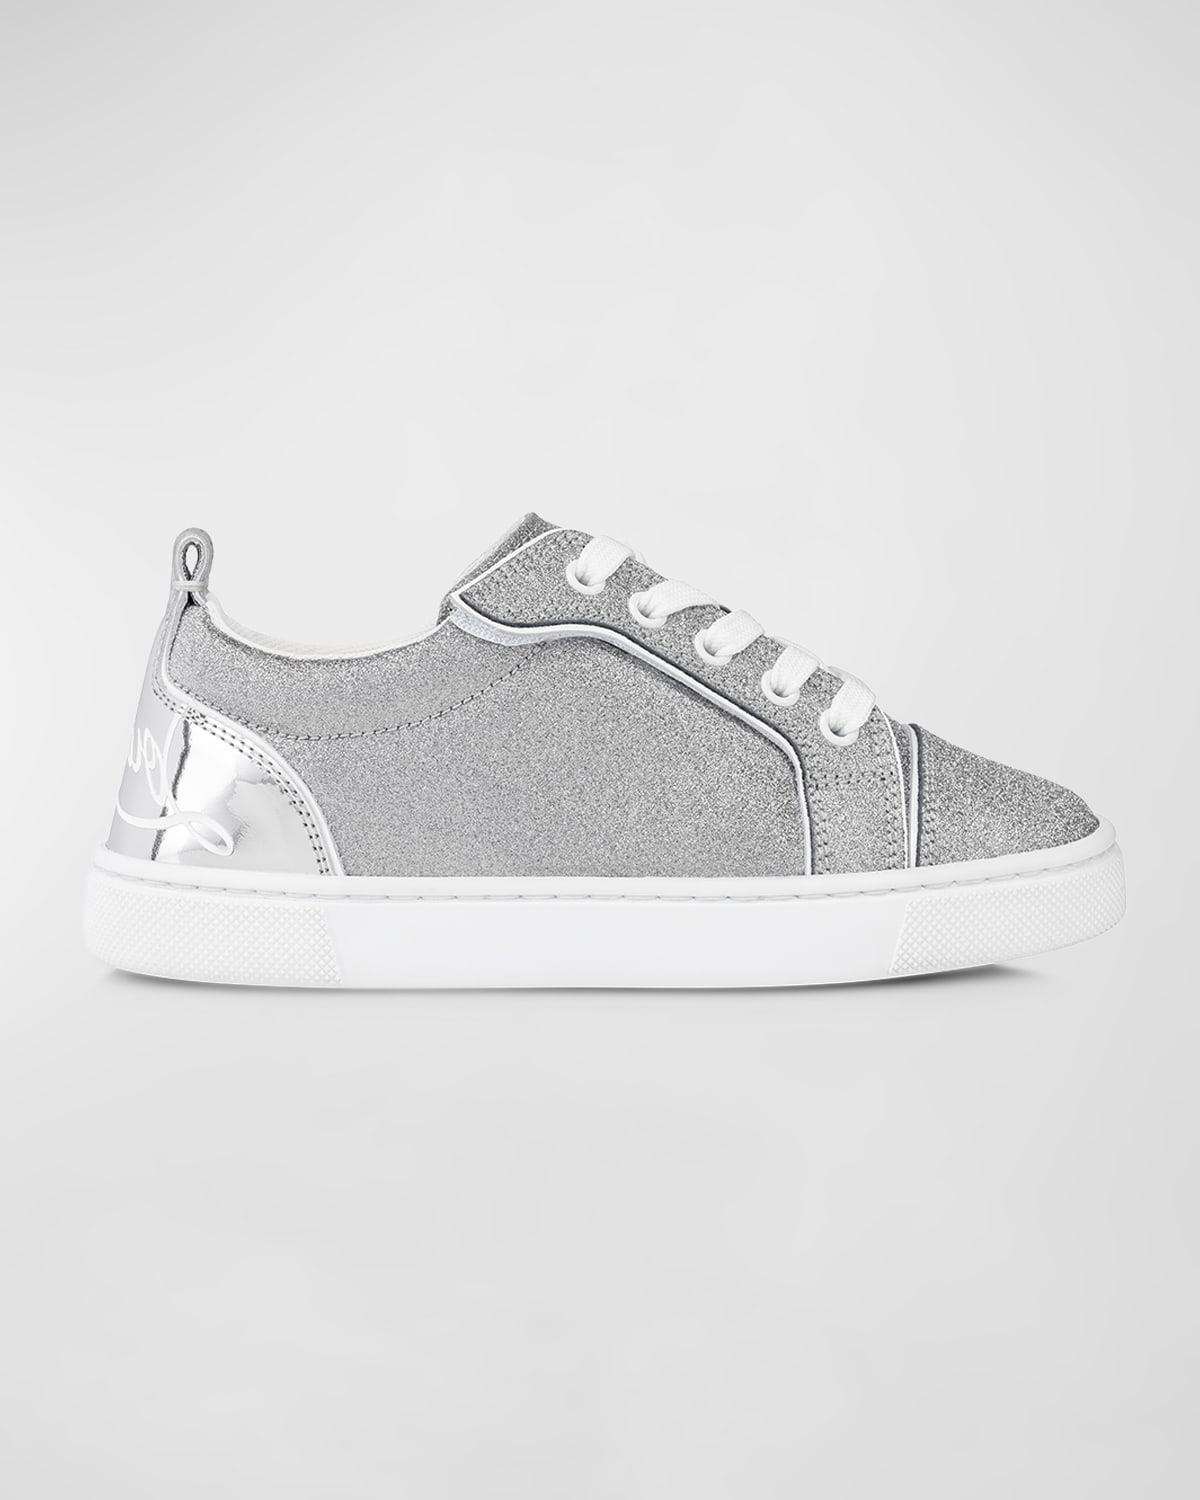 Christian Louboutin Girl's Funnyto Patent Leather Glitter Low-top Trainers, Toddlers/kids In Silver